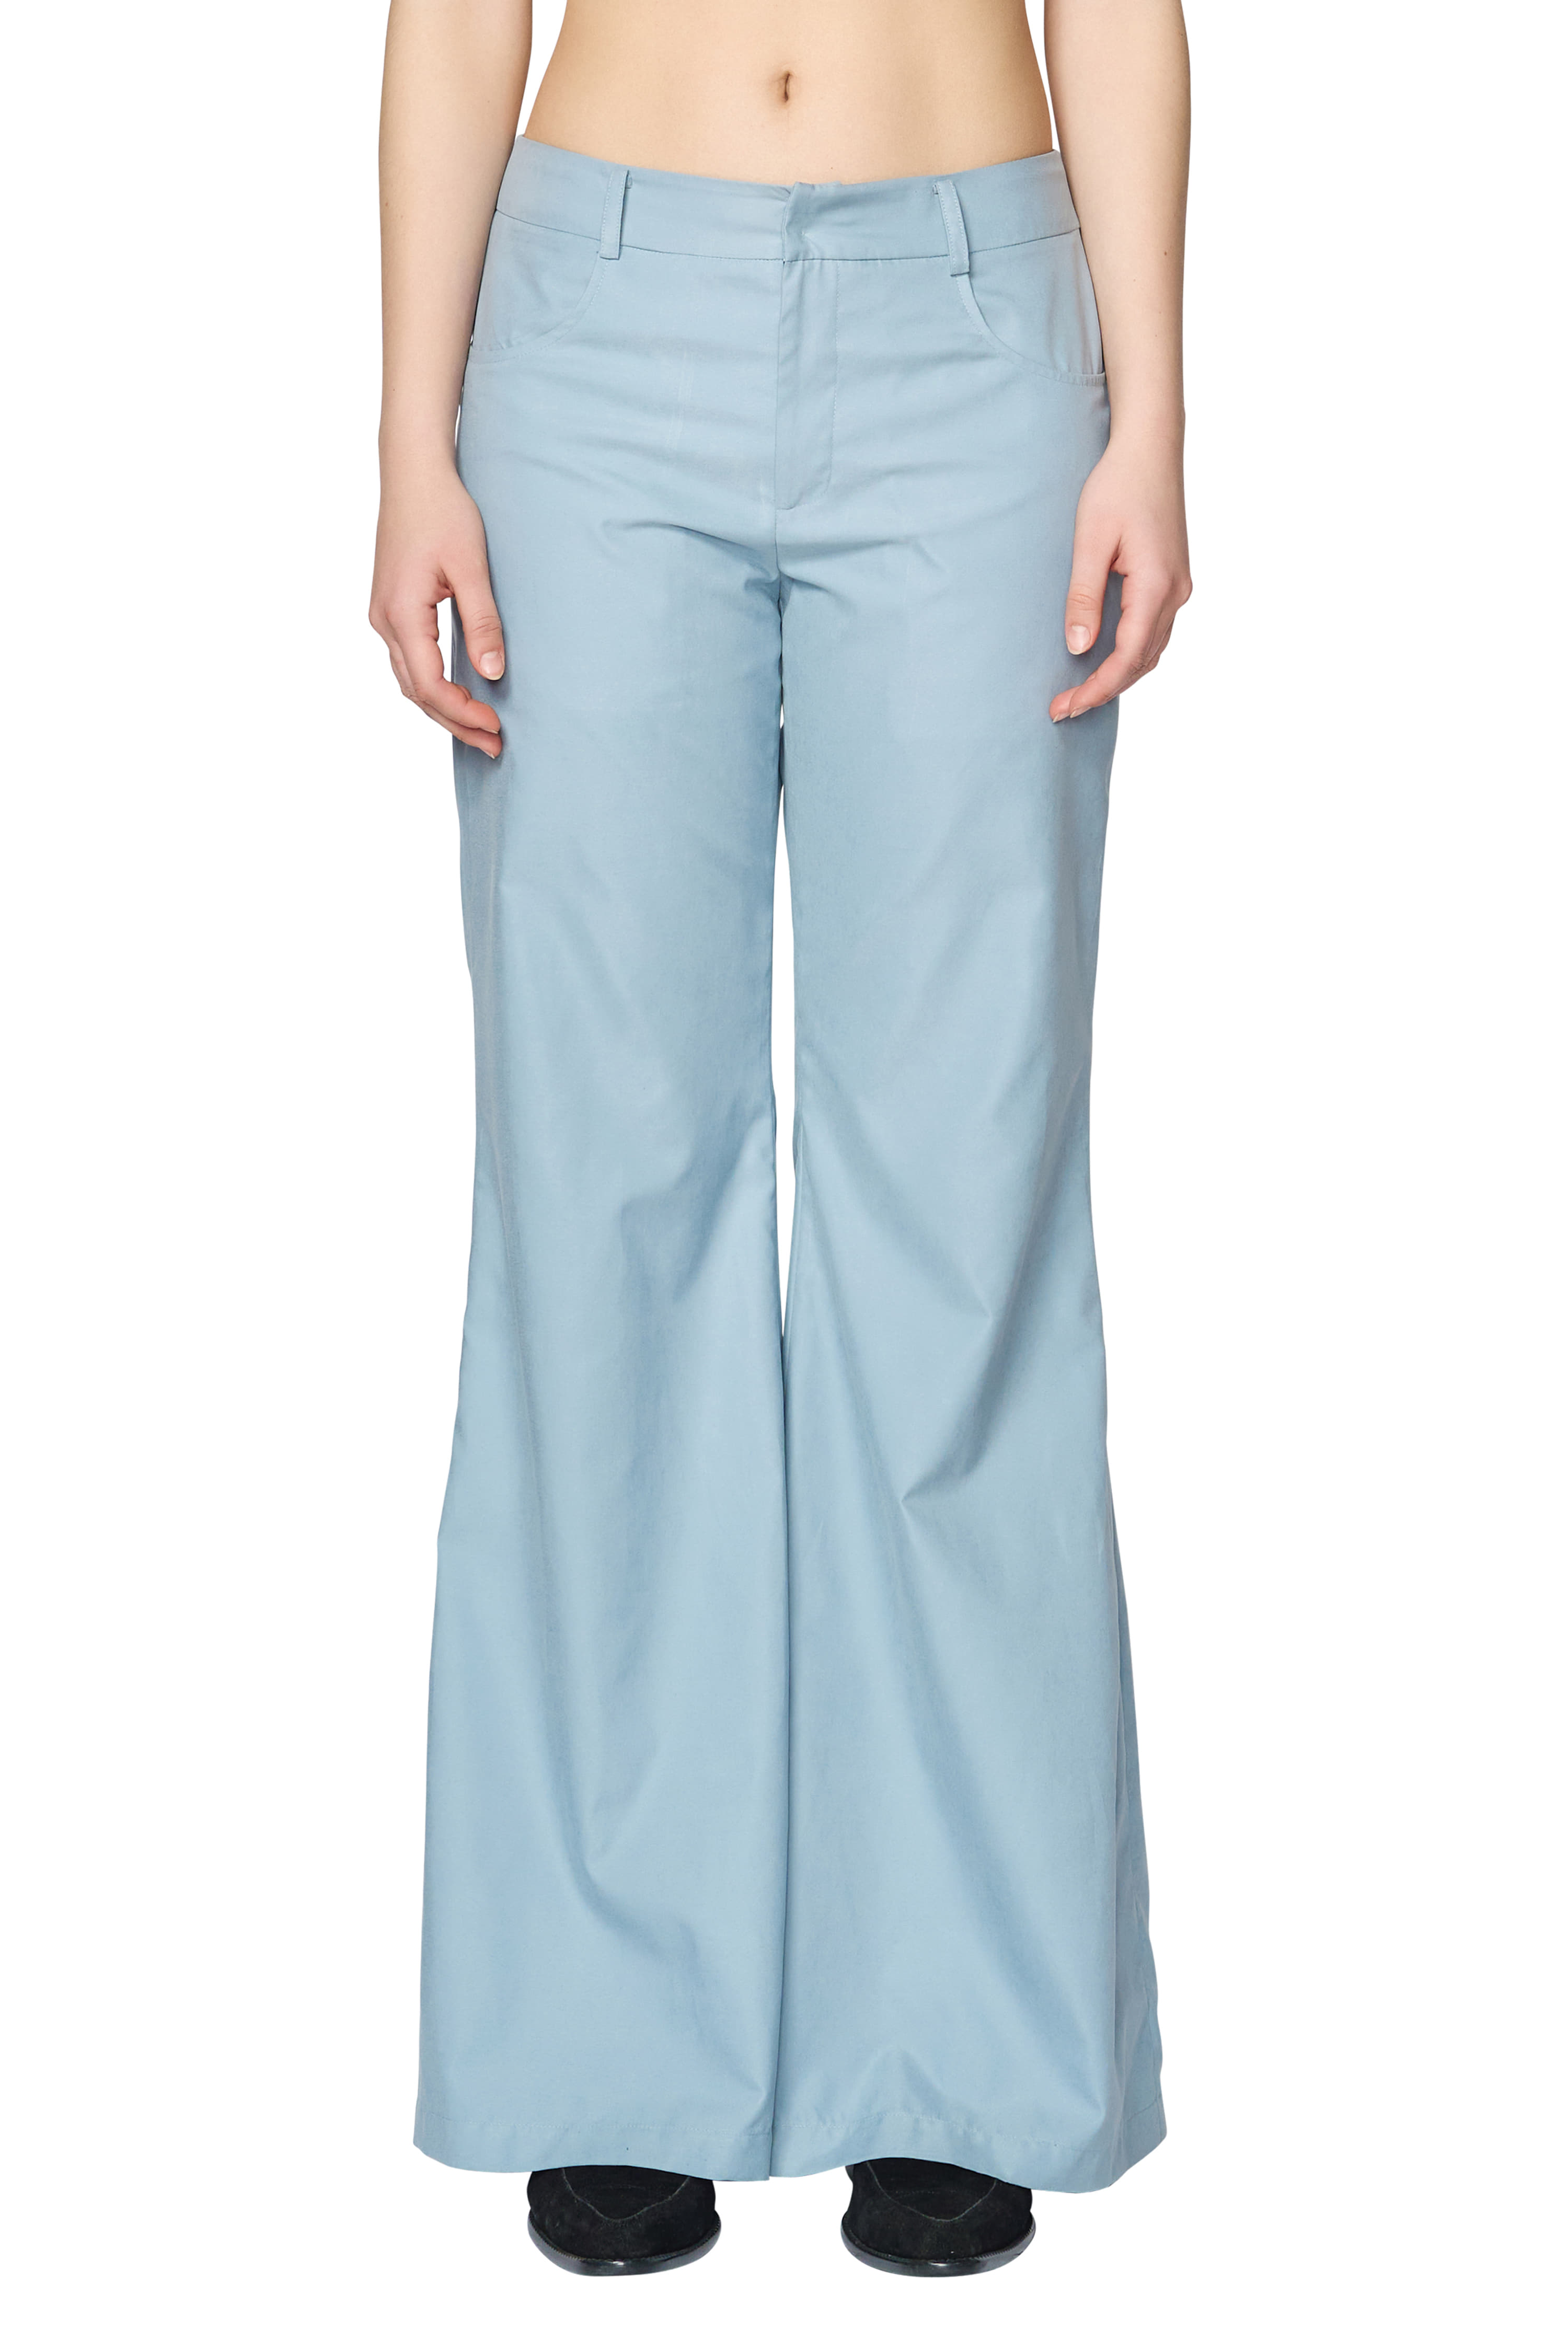 [ Delivery from 5/1 ] LIGHT BLUE BOOTCUT TROUSERS